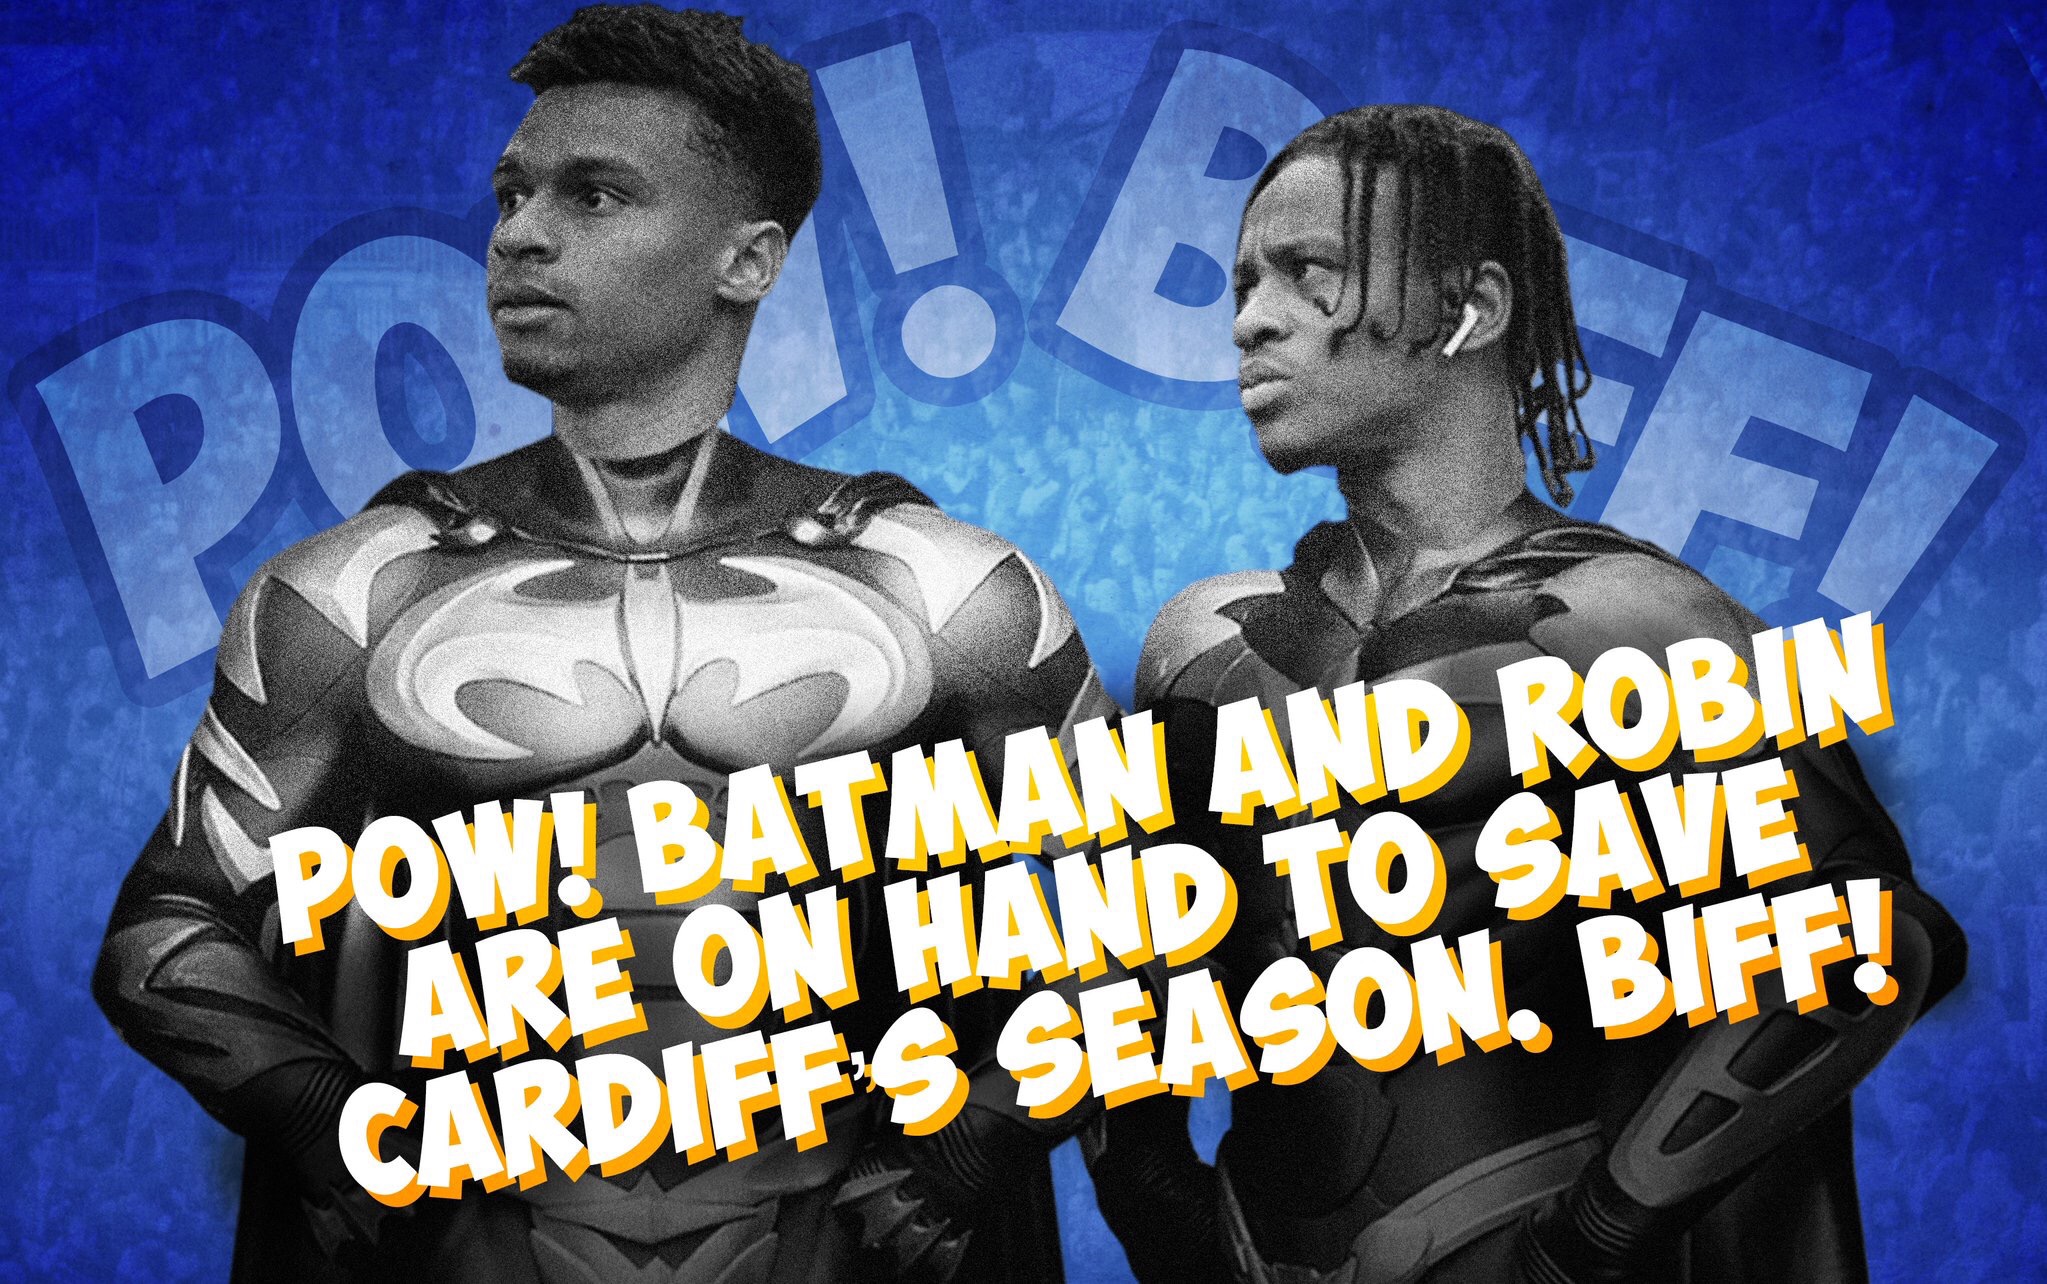 Batman and Robin are on hand to save Cardiff’s season